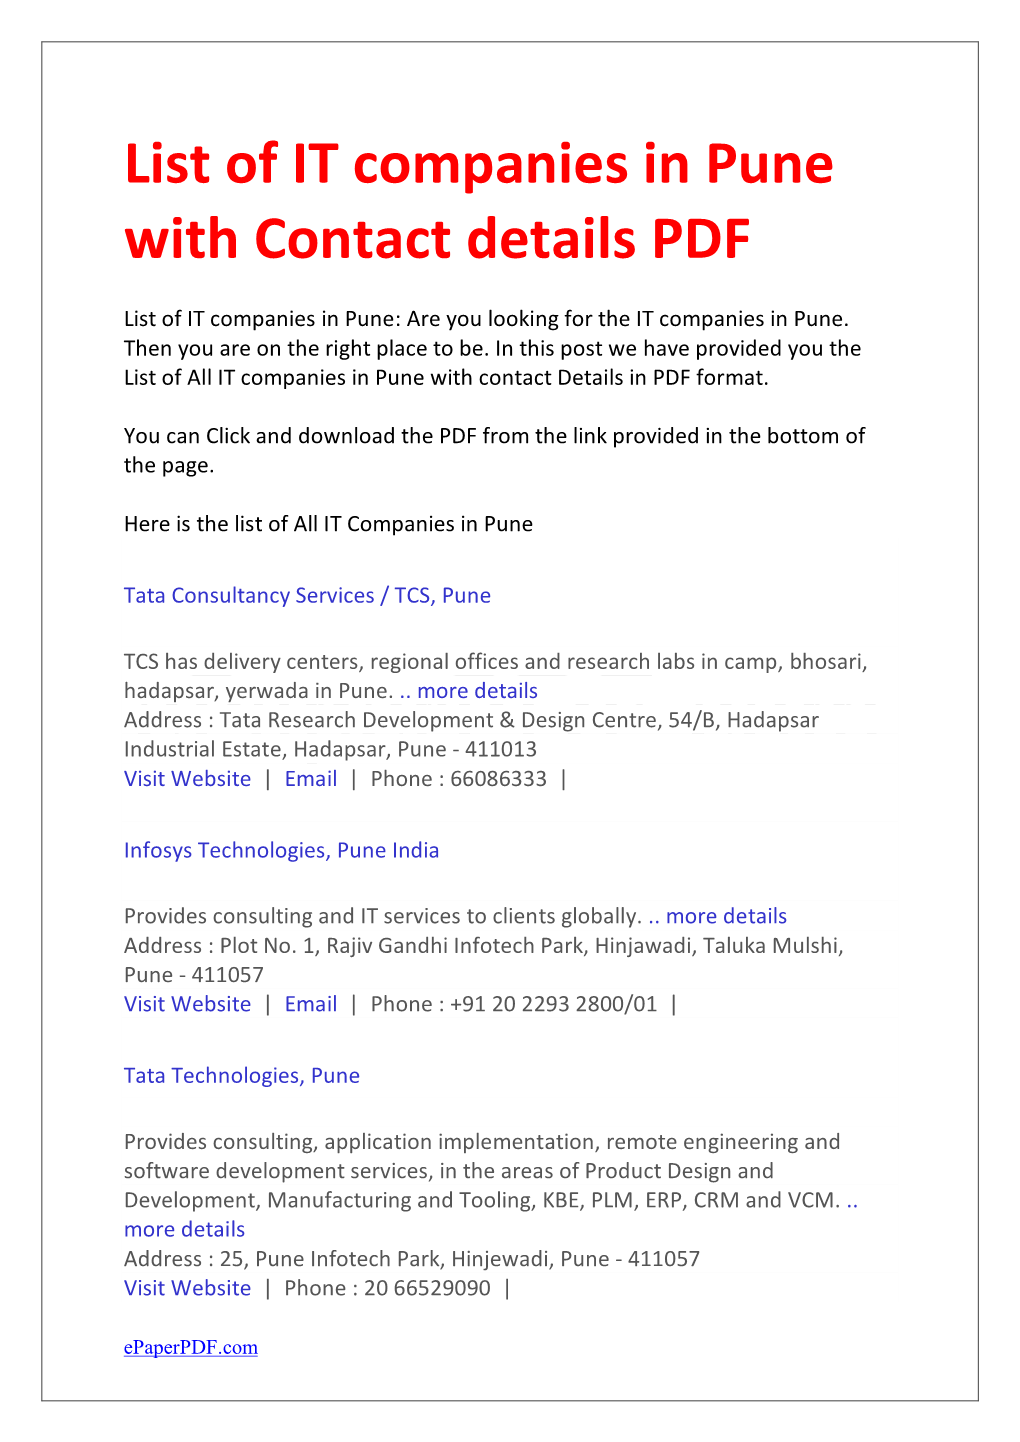 List of IT Companies in Pune with Contact Details PDF